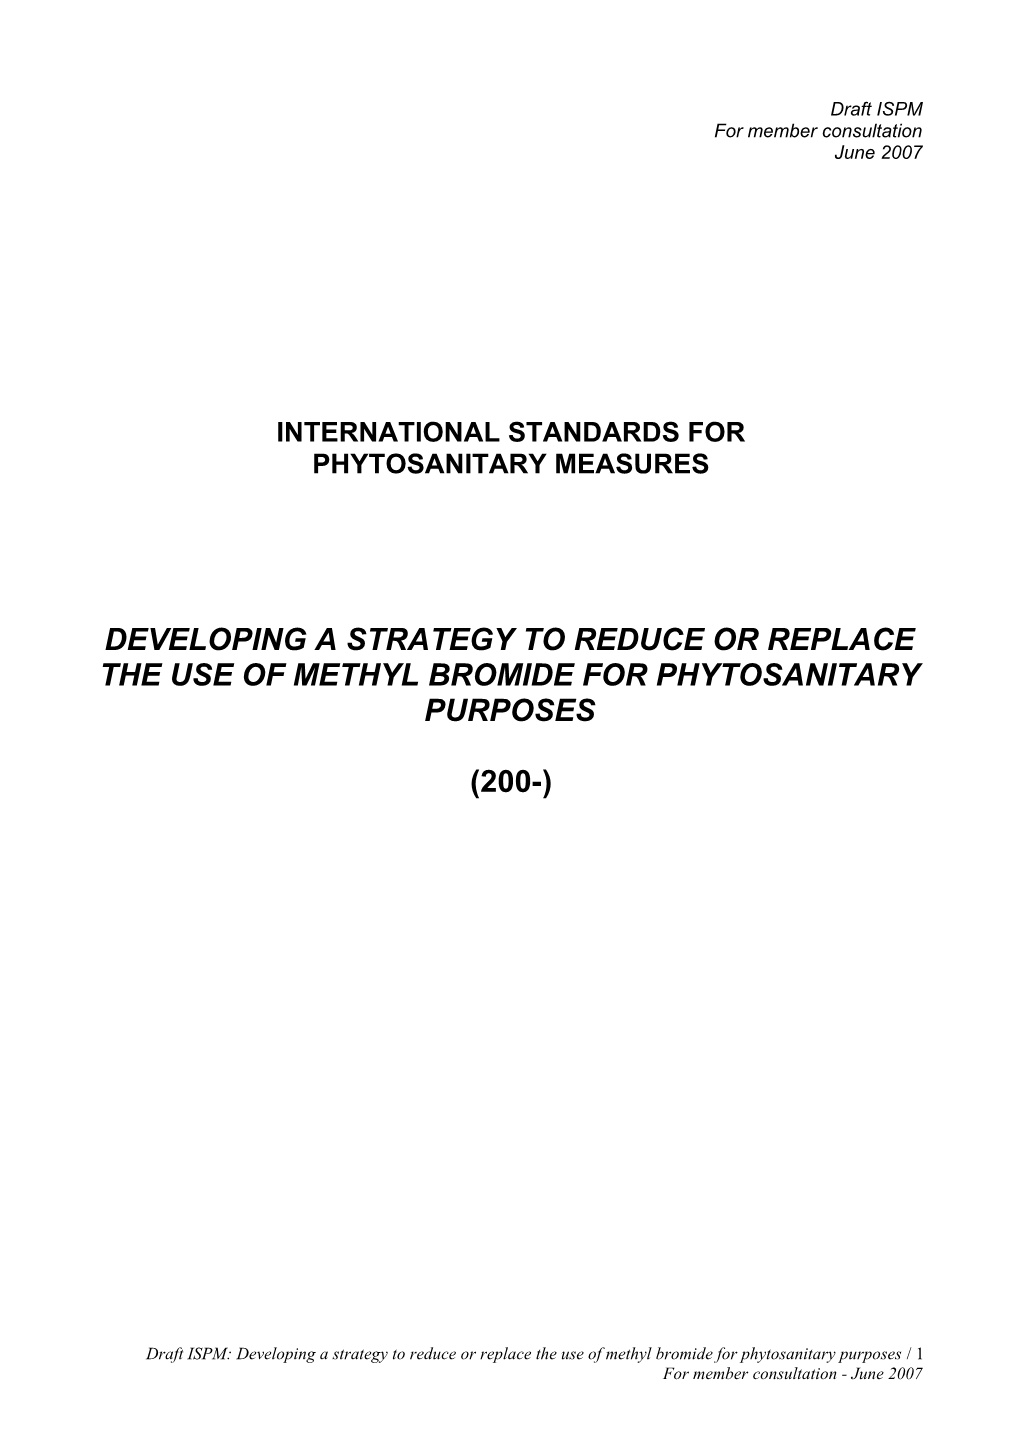 Strategy for Alternatives to Phytosanitary Uses of Methyl Bromide